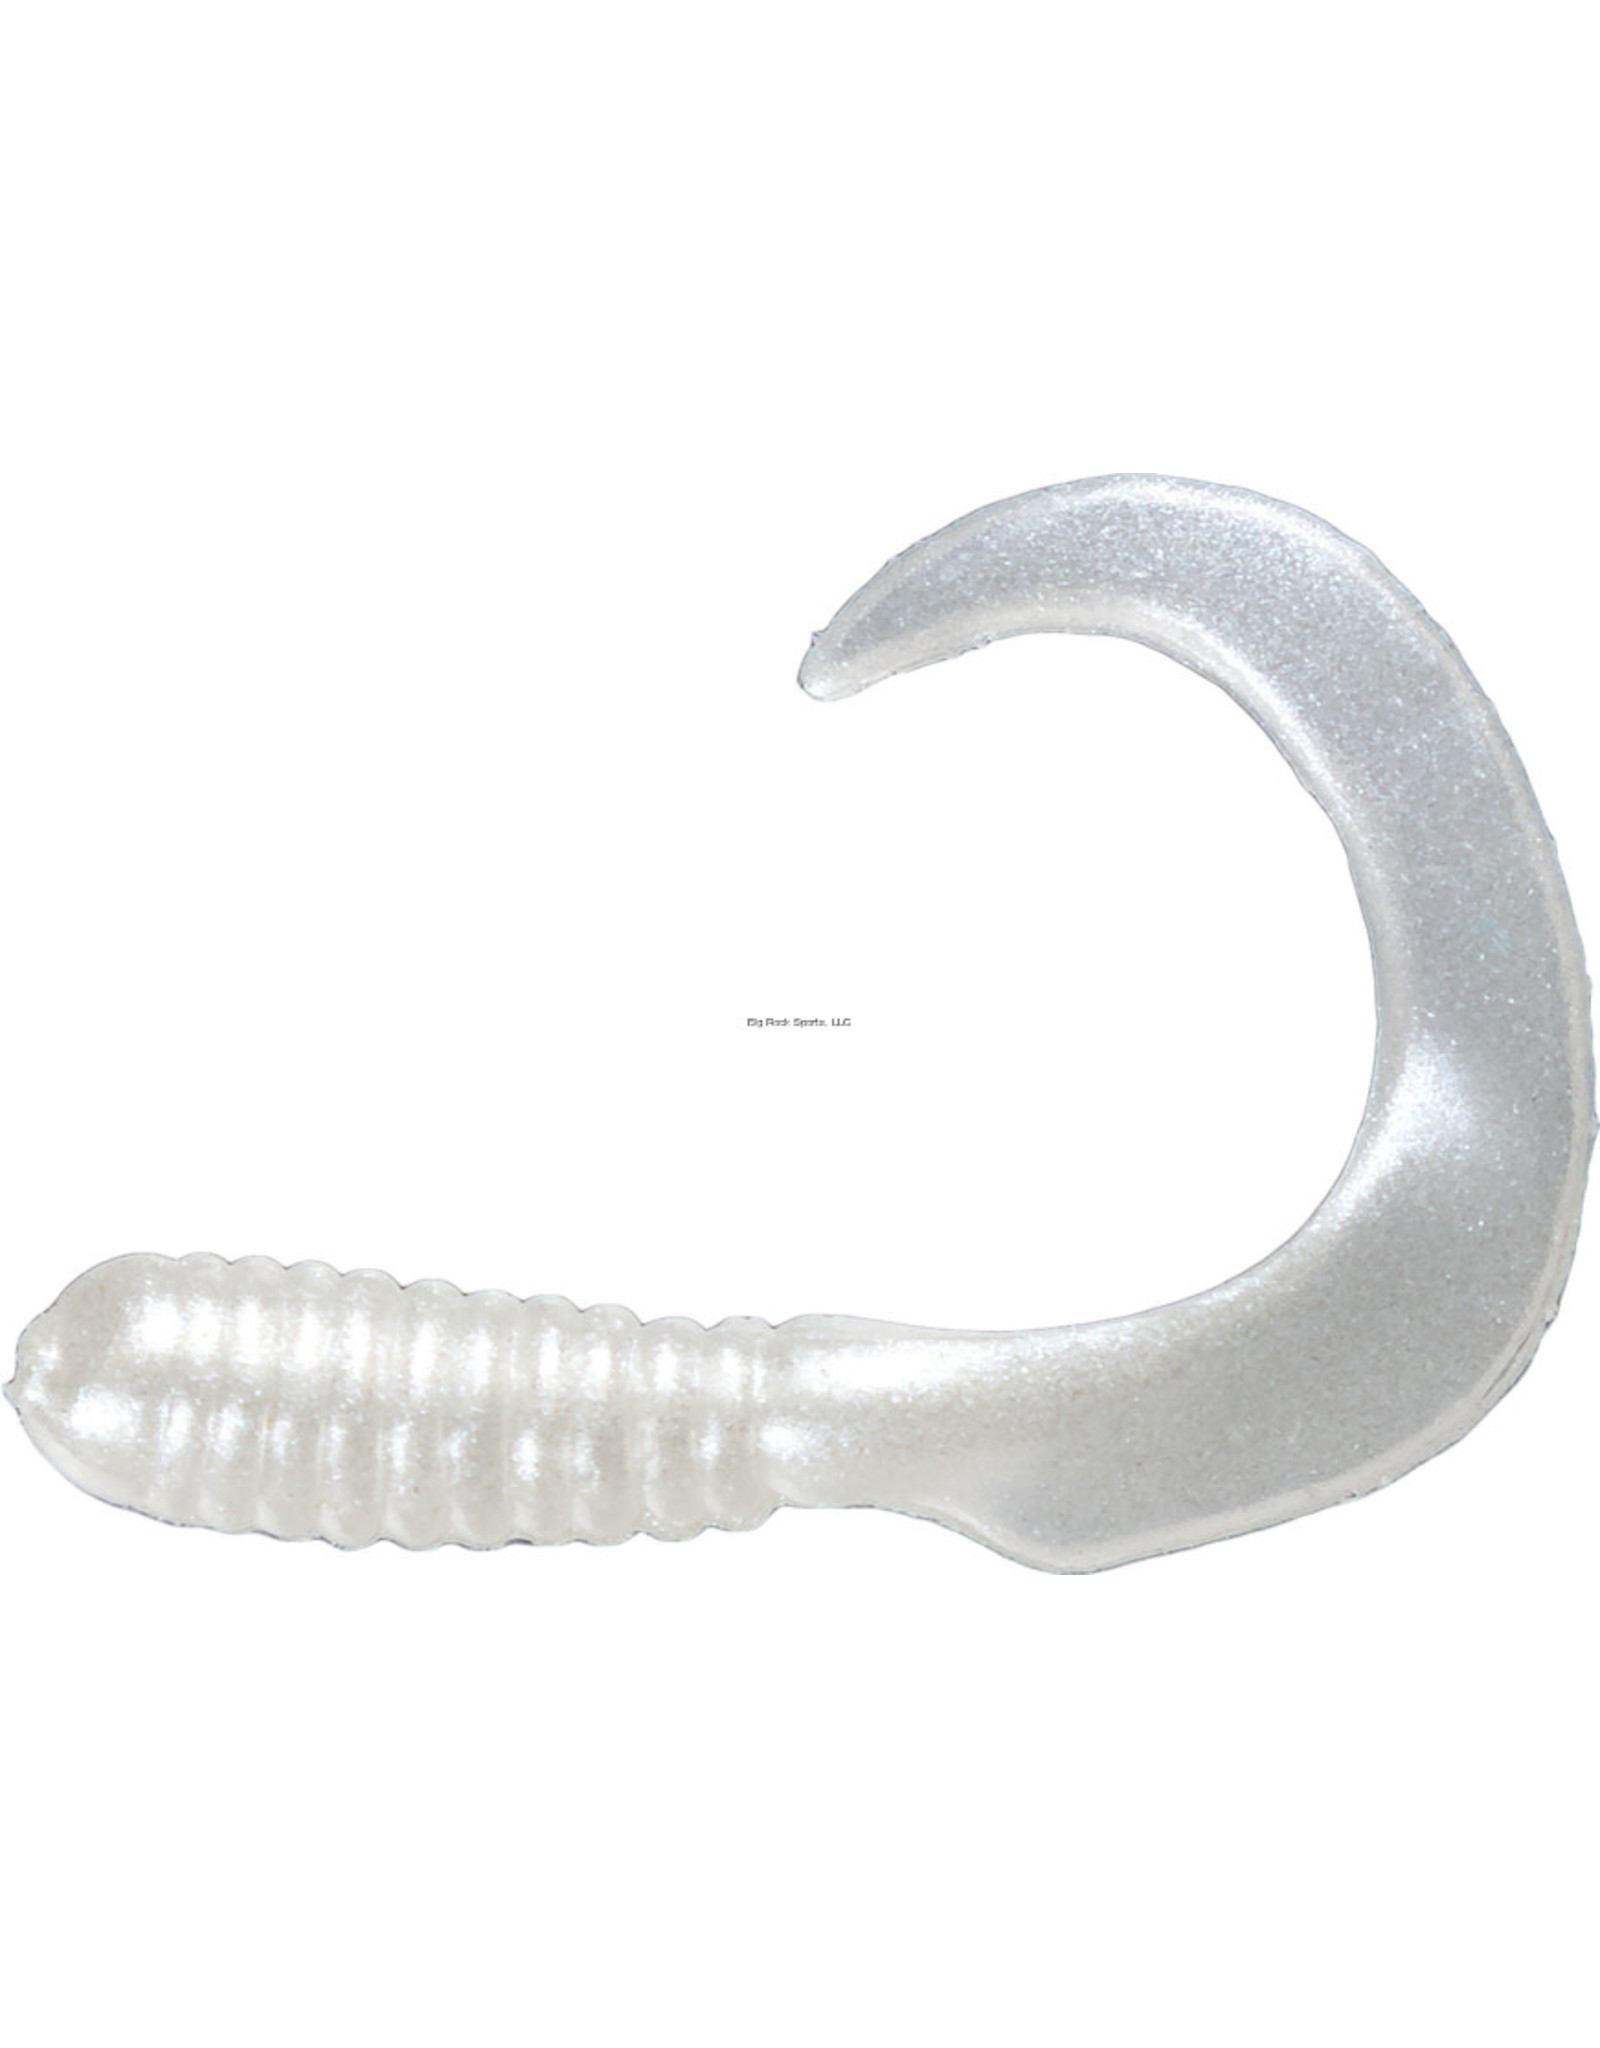 Dry Creek Dry Creek - Jerry's 2" Assault Grub - Pearl - 20 Count